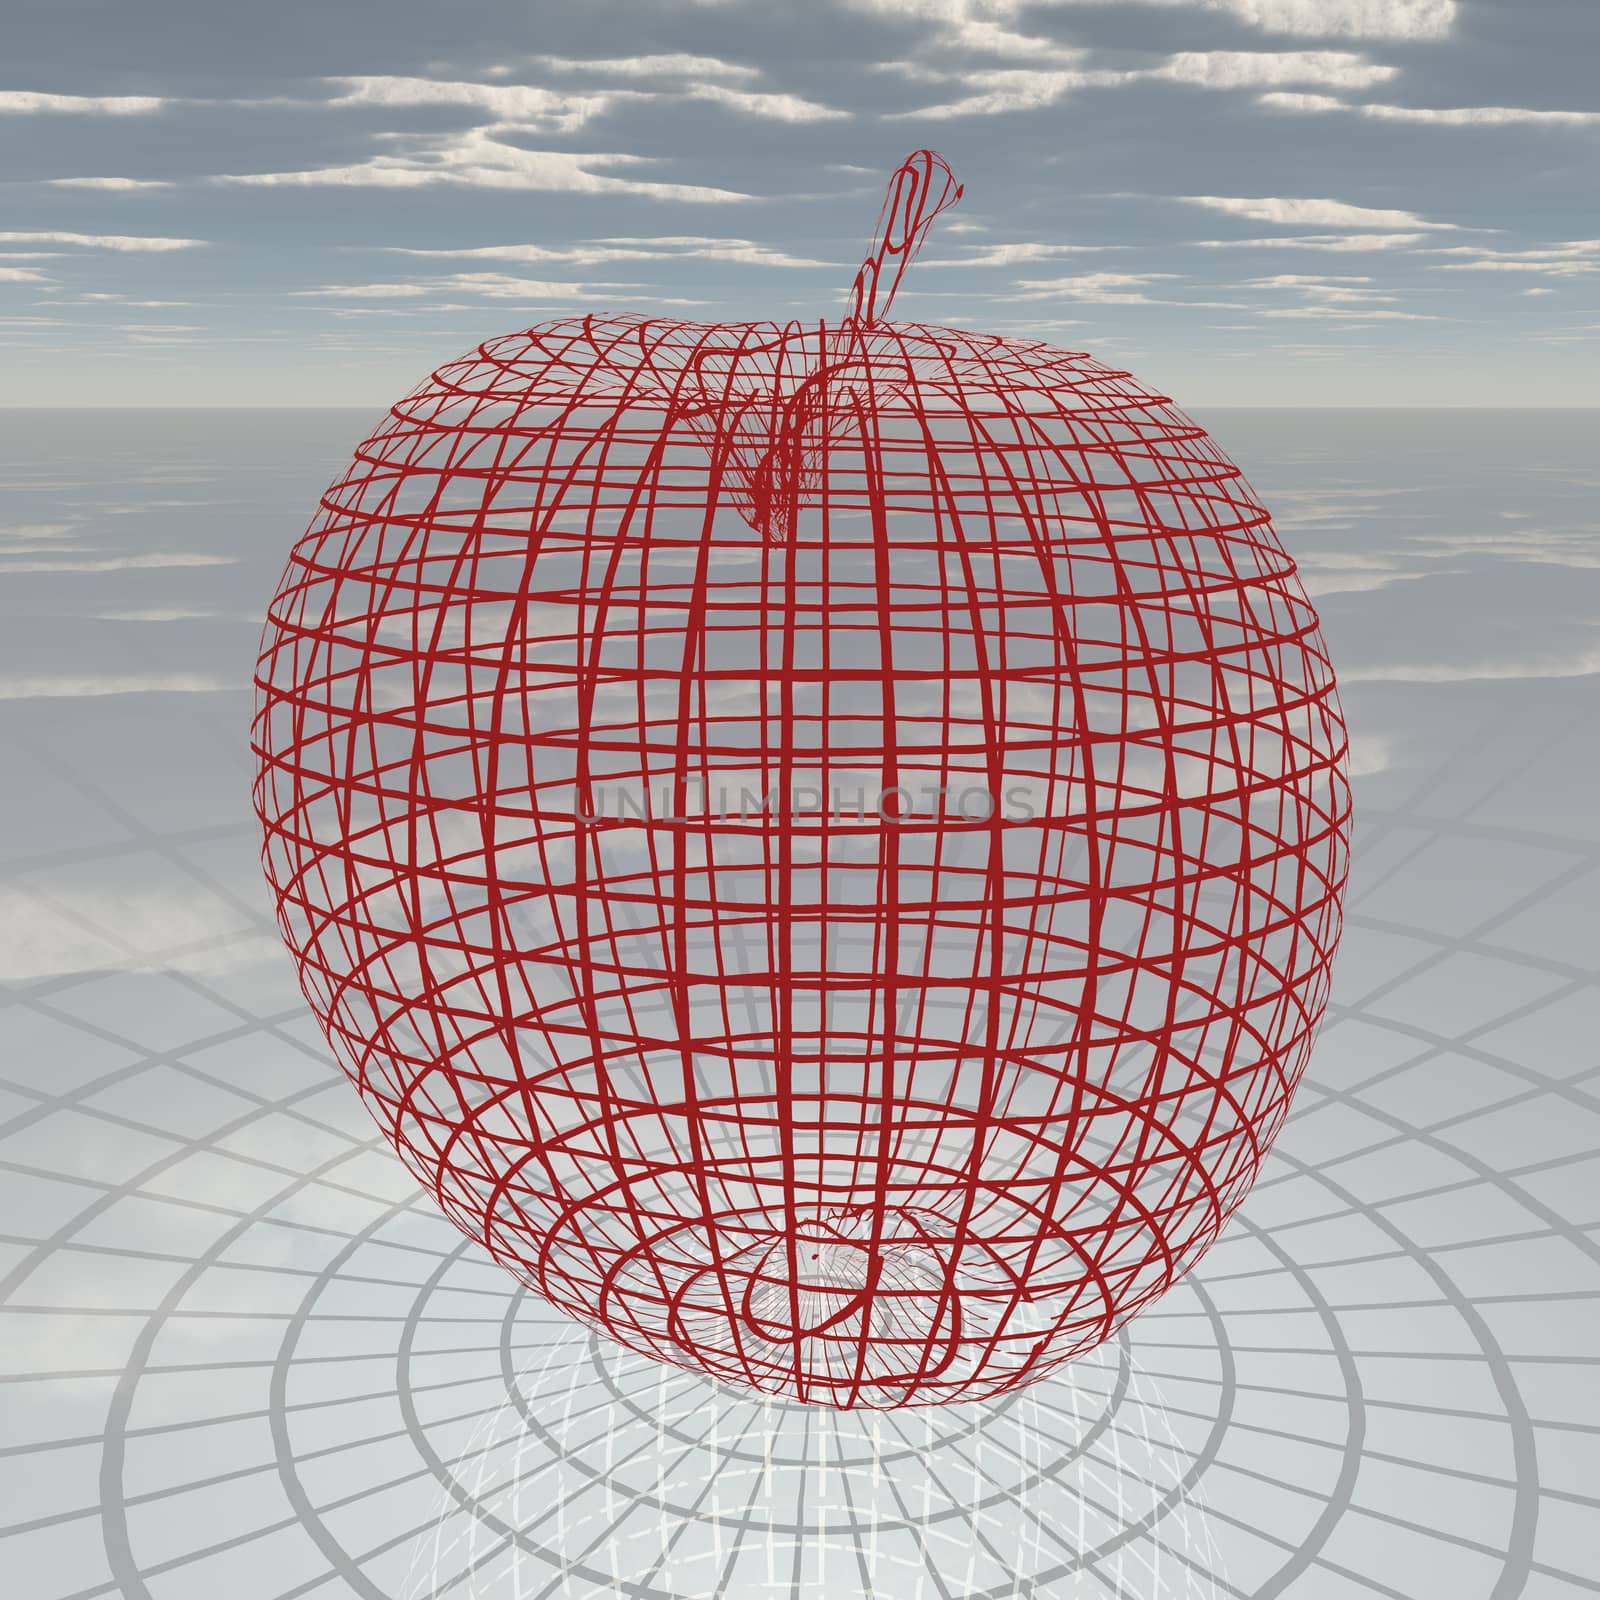 3D rendered Apple. Cloudy sky